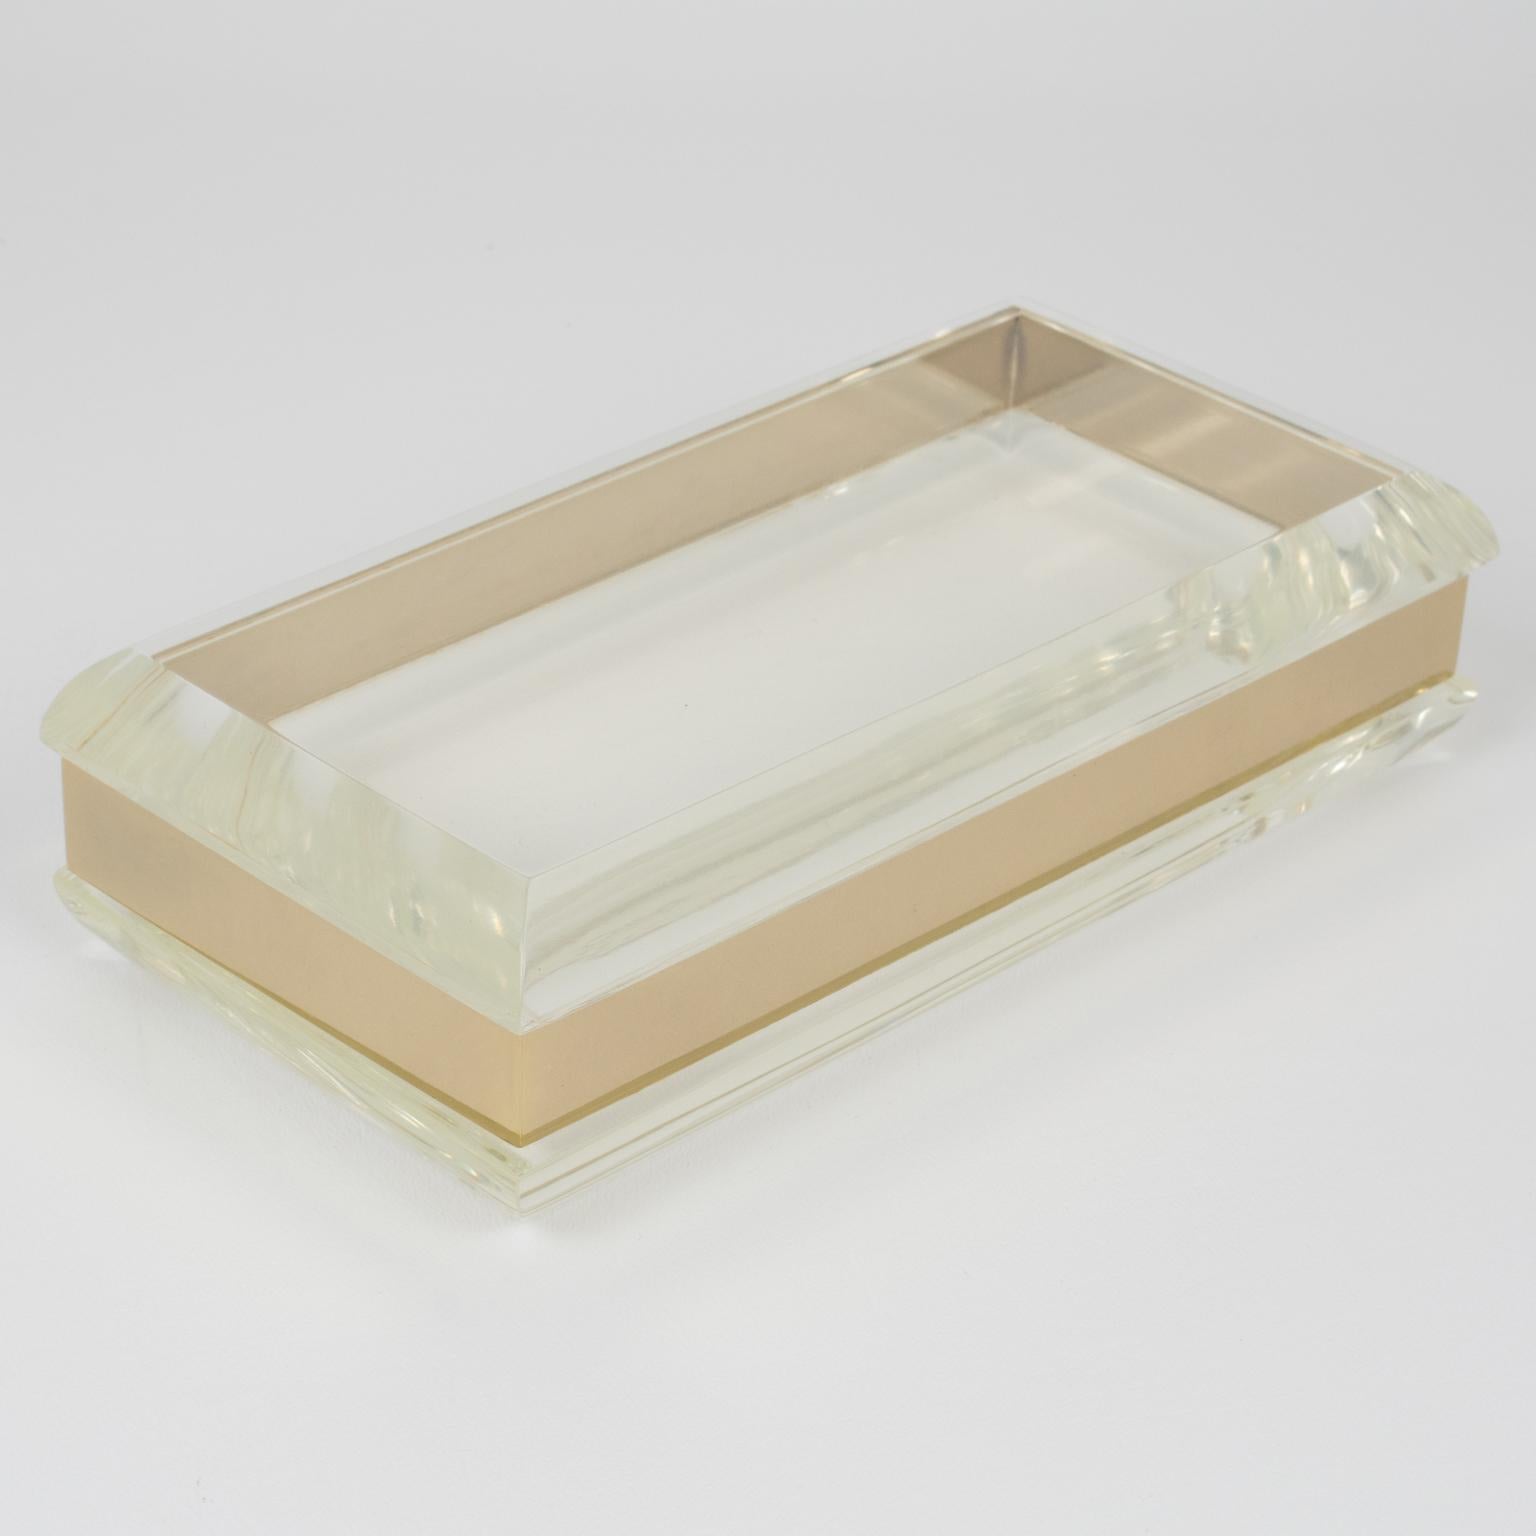 This stunning rectangular decorative lidded box has a design reminiscent of Philippe Cheverny's work. Crafted in the 1970s, the lovely decorative piece boasts a geometric shape with an extra-thick transparent Lucite slab for the base and the lid.